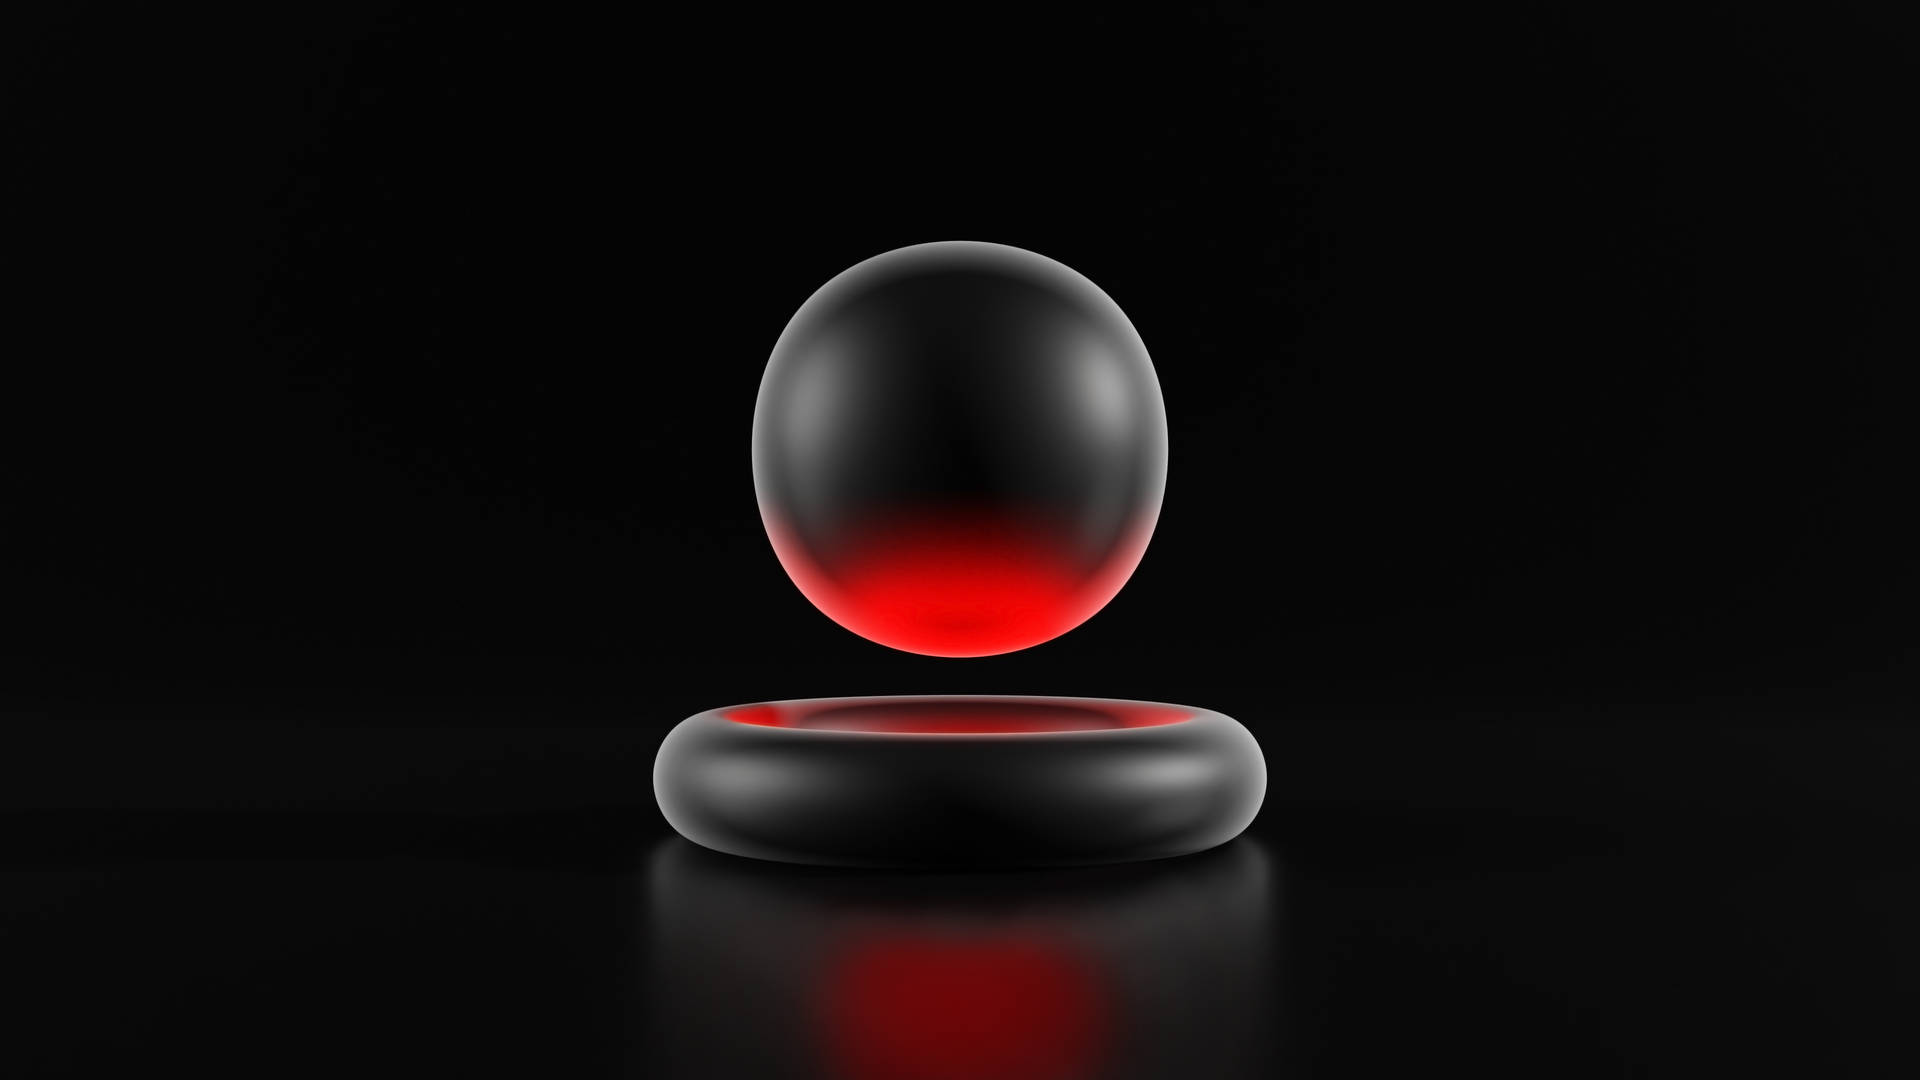 Hal 9000, The Iconic Artificially Intelligent Computer From 